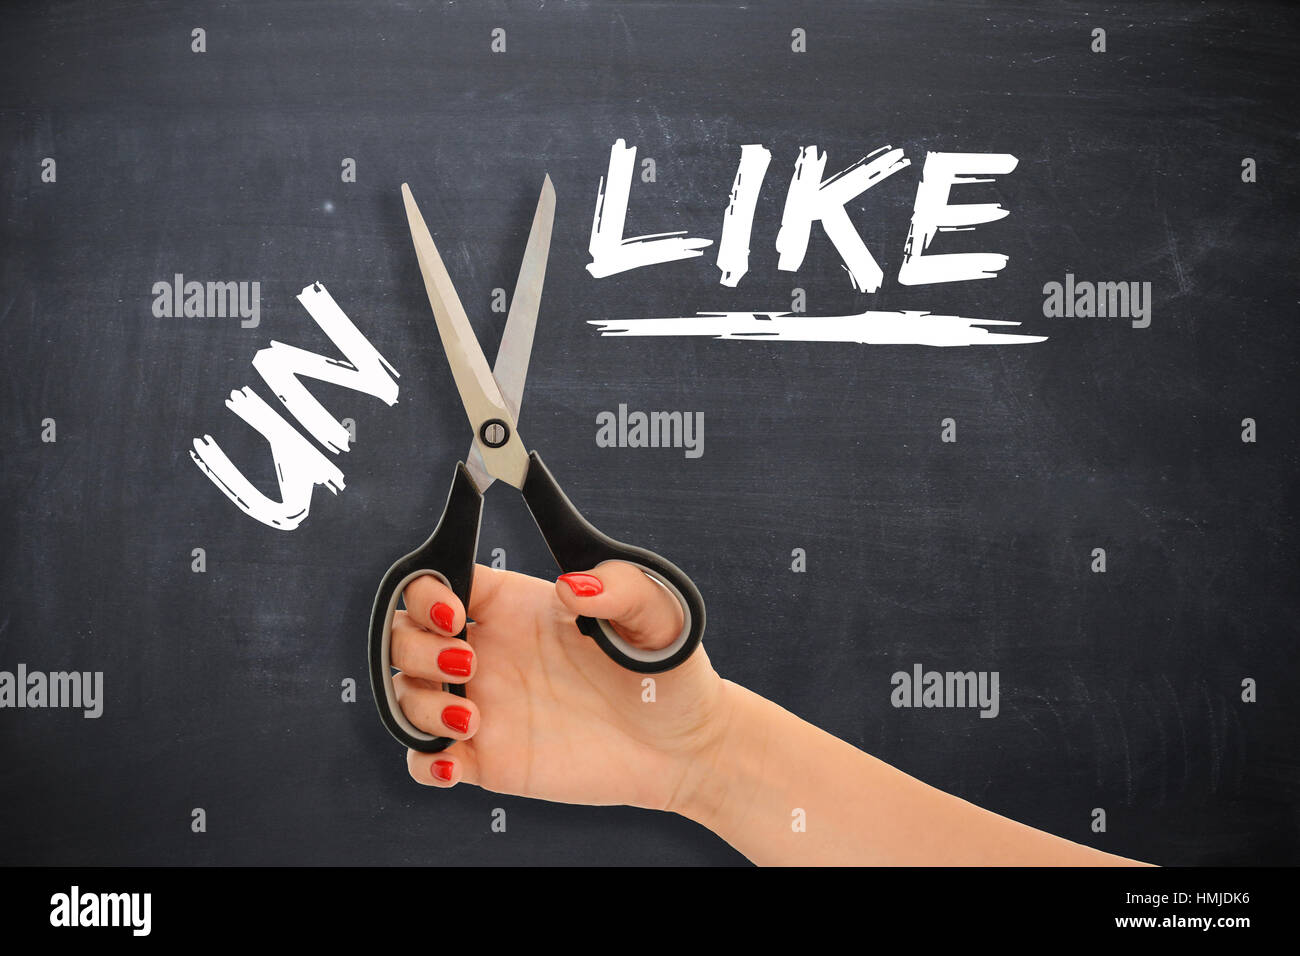 Woman transforming the word “unlike” to the word “like” by cutting the prefix with scissors Stock Photo